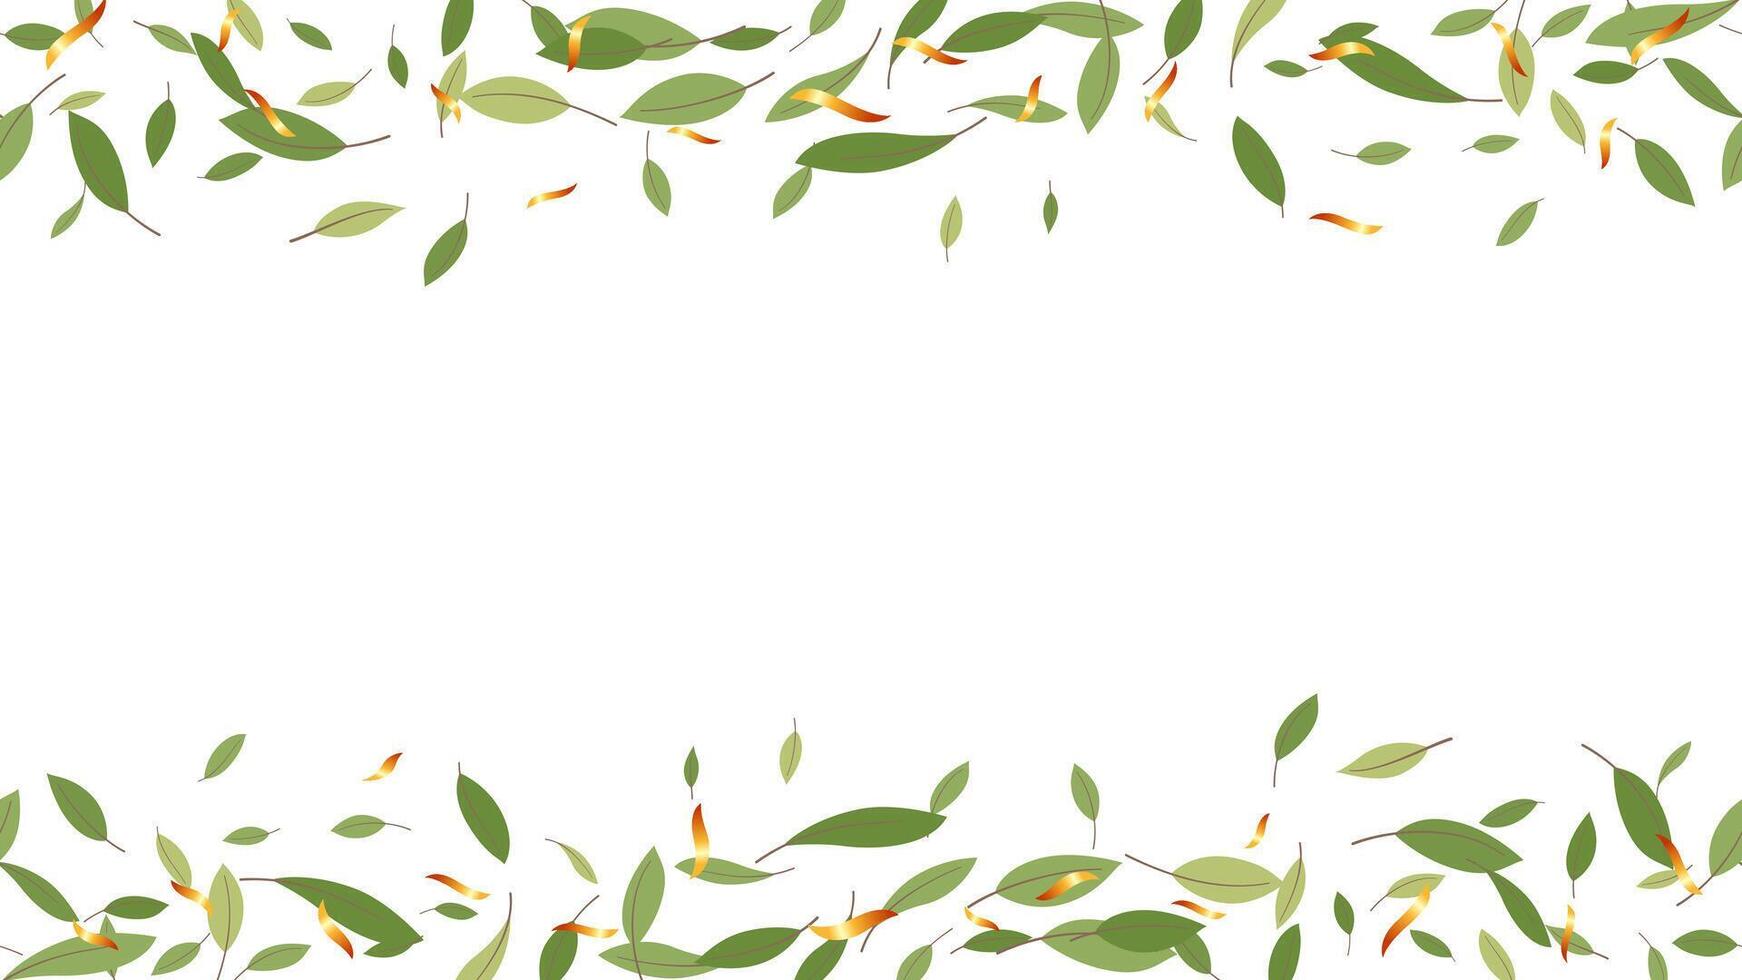 decoration frame copy space ecology green leaf and gold confetti seasonal vector